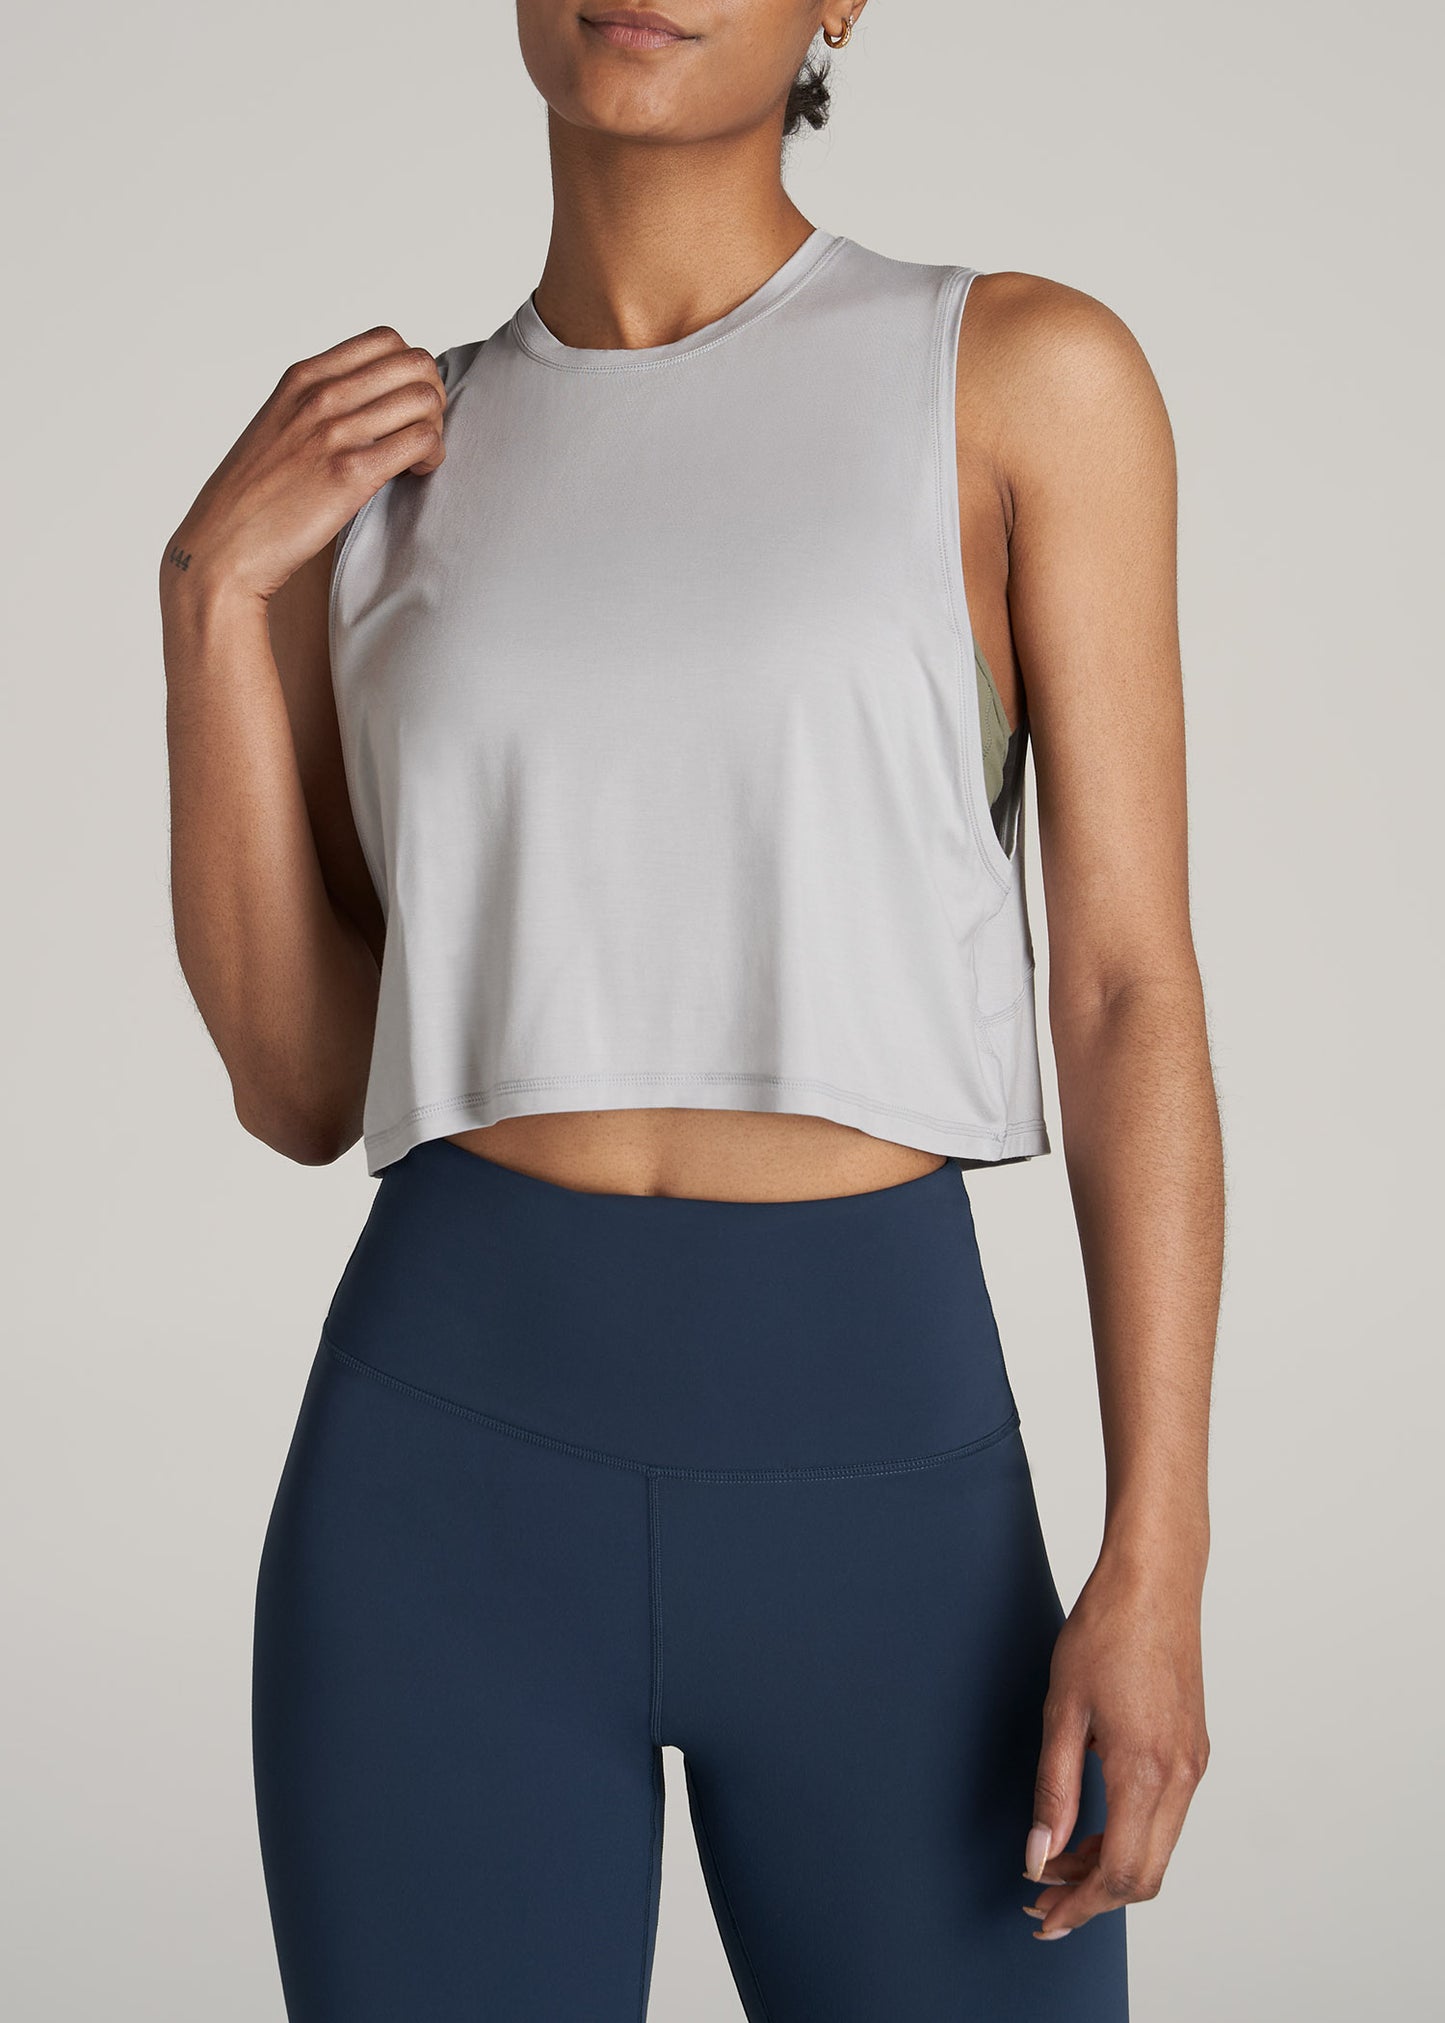 Cropped Muscle Tank: Women's Tall Crop Muscle Tank Silver – American Tall